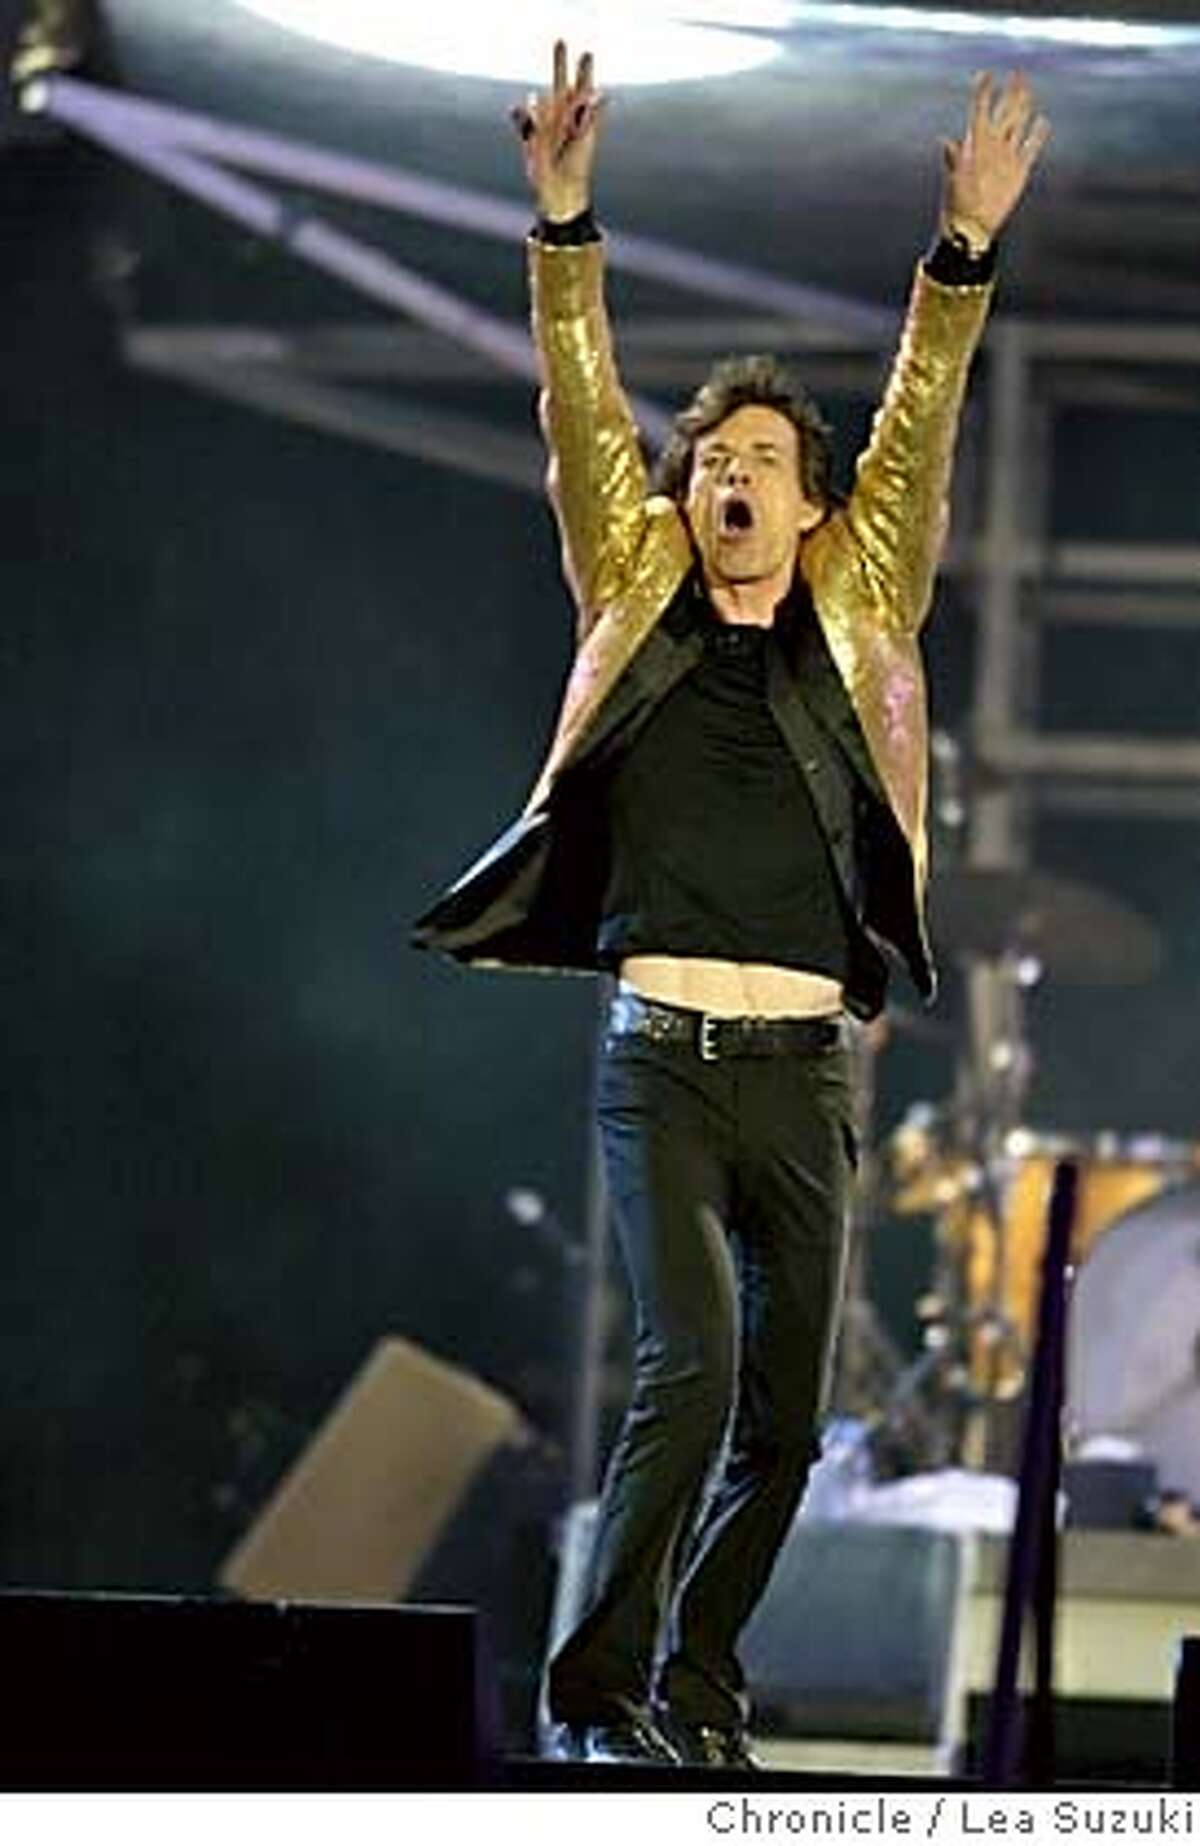 Mick Jagger of the Rolling Stones performs at SBC. Rolling Stones perform at SBC. Two song limit - one from 70 feet back, other in pit. Ticket Pick-Up (1 ticket) ROLLING STONES "A BIGGER BANG WORLD TOUR" Sunday, November 13, 2005 San Francisco, Calif. SBC Park Meeting Times: 5:30 pm to see opening act, Everclear 6:15pm to see opening act, Metallica 8:00pm for the Stones Location: Corner of 2nd and King Street, Side closest to the venue, under large South Beach Harbor sign Photo taken on 11/13/05 in San Francisco, CA. Photo by Lea Suzuki/ The San Francisco Chronicle /MAGAZINES OUT